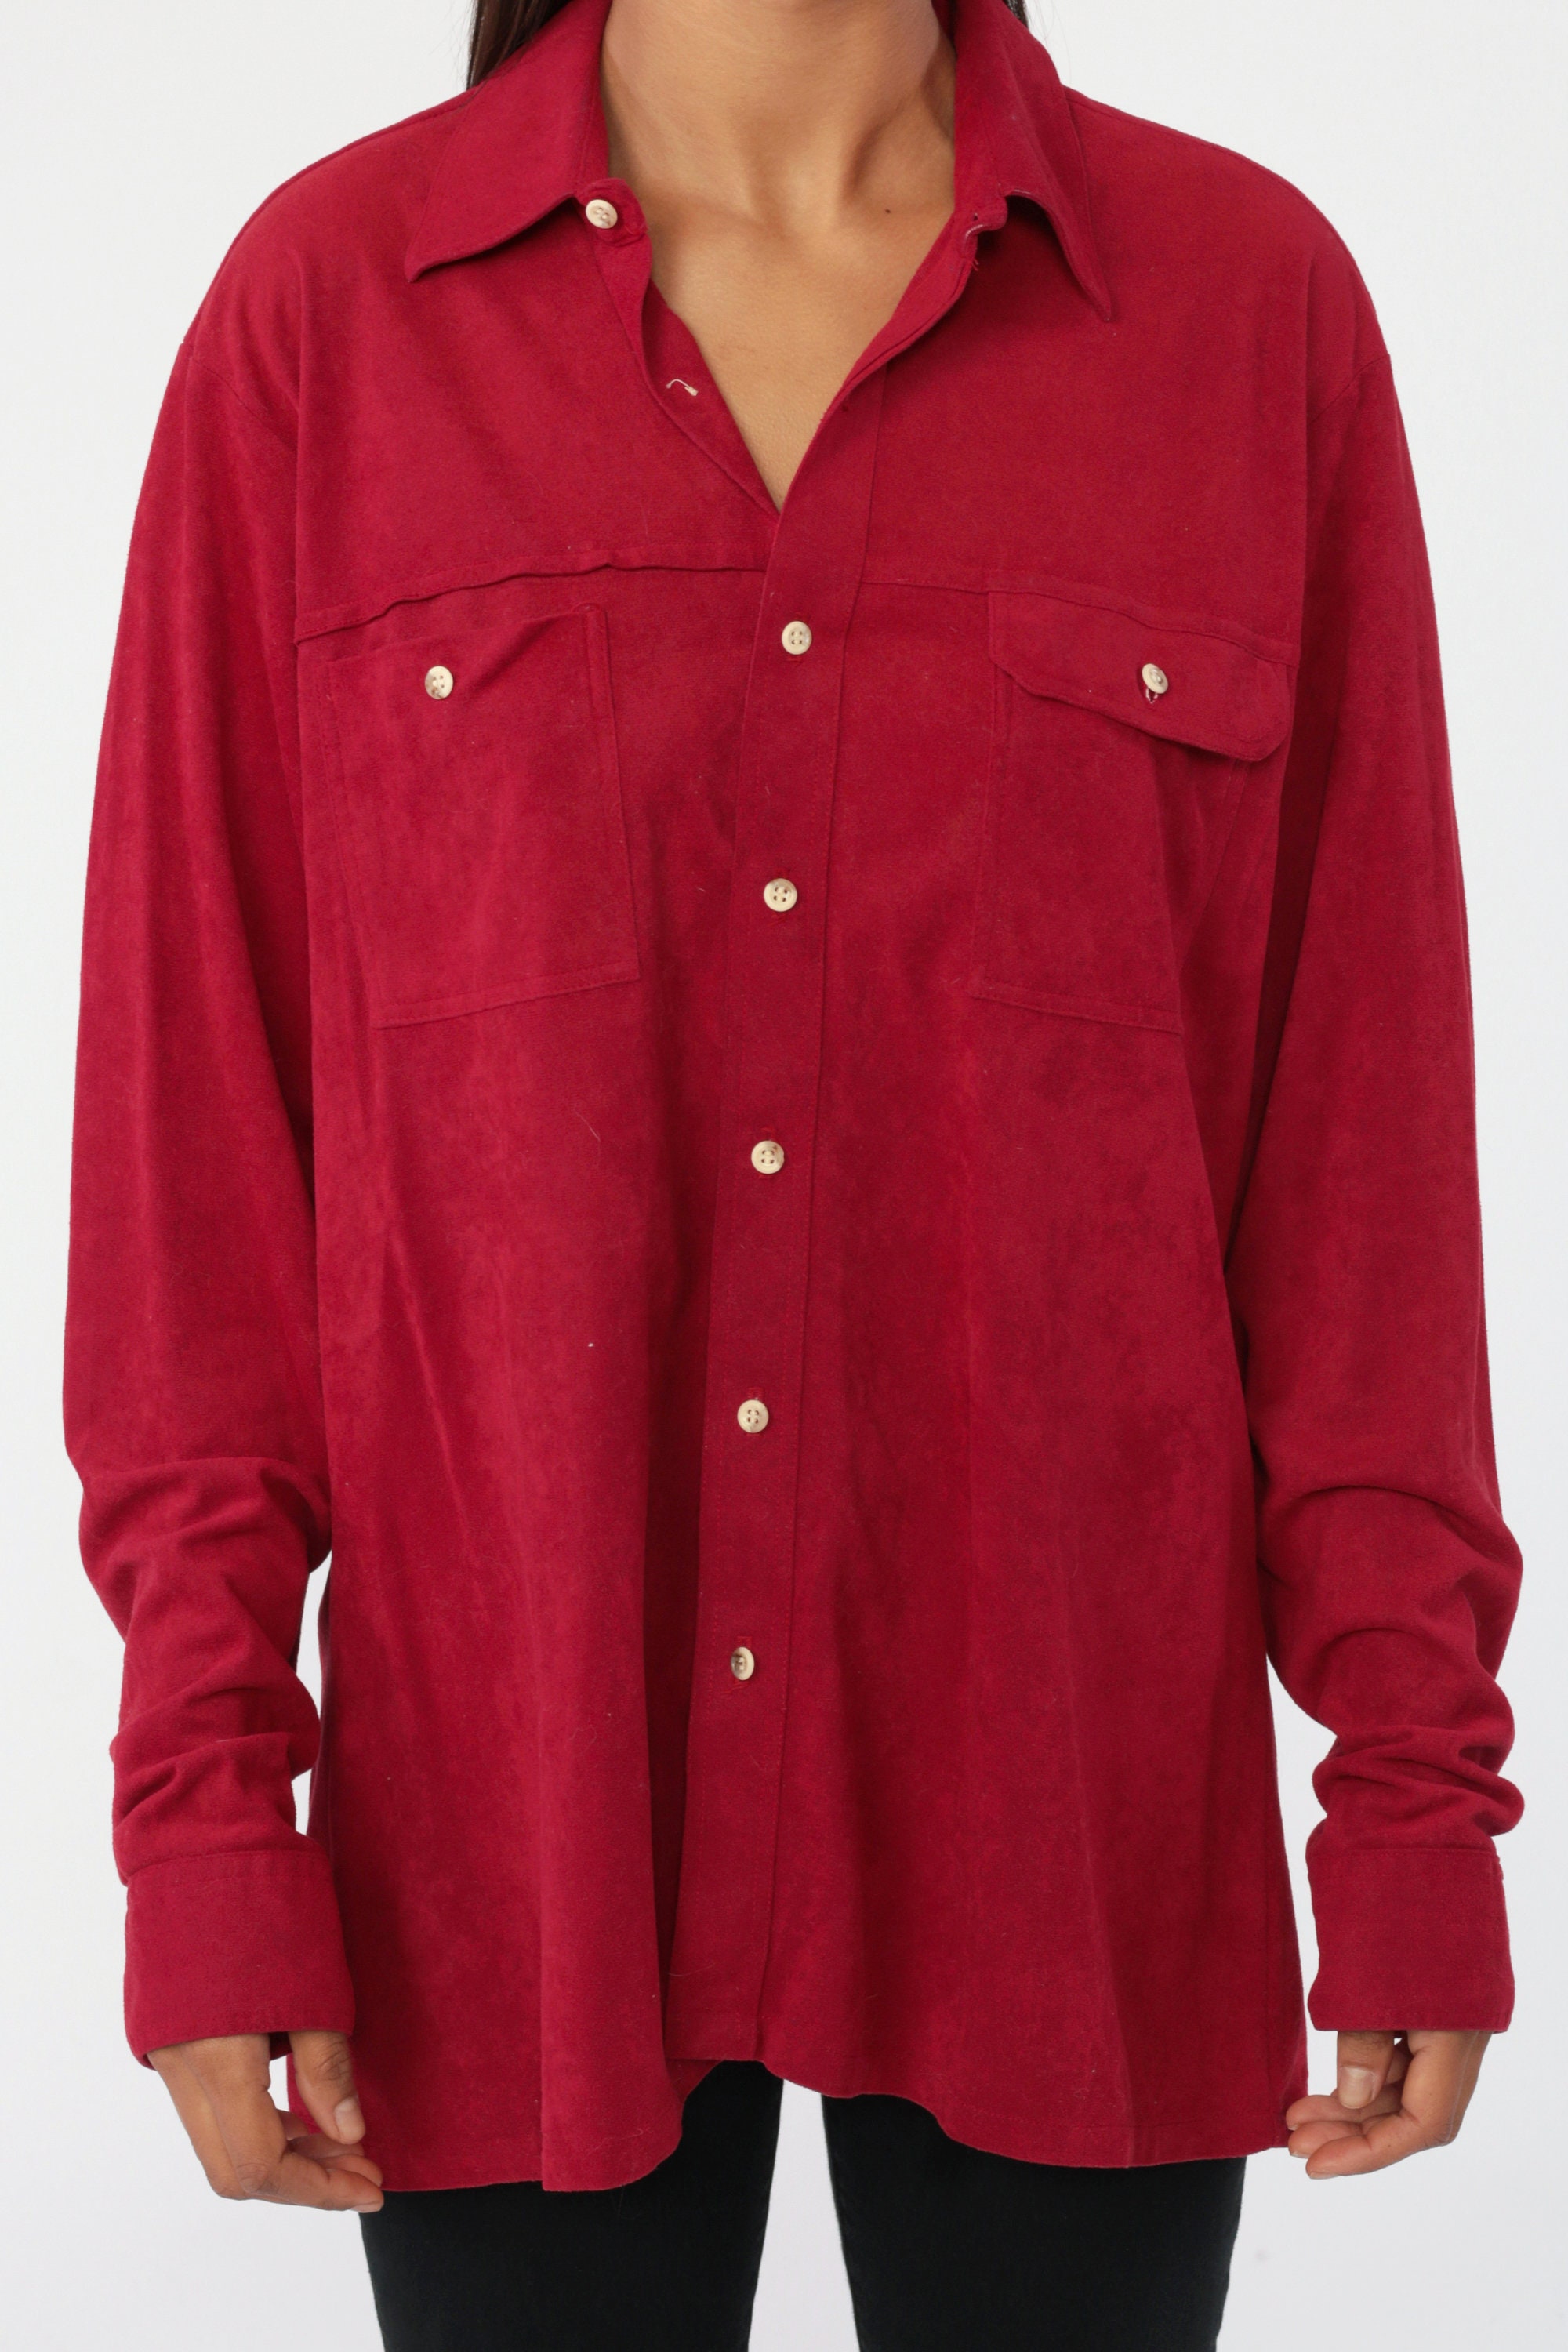 red button up shirts